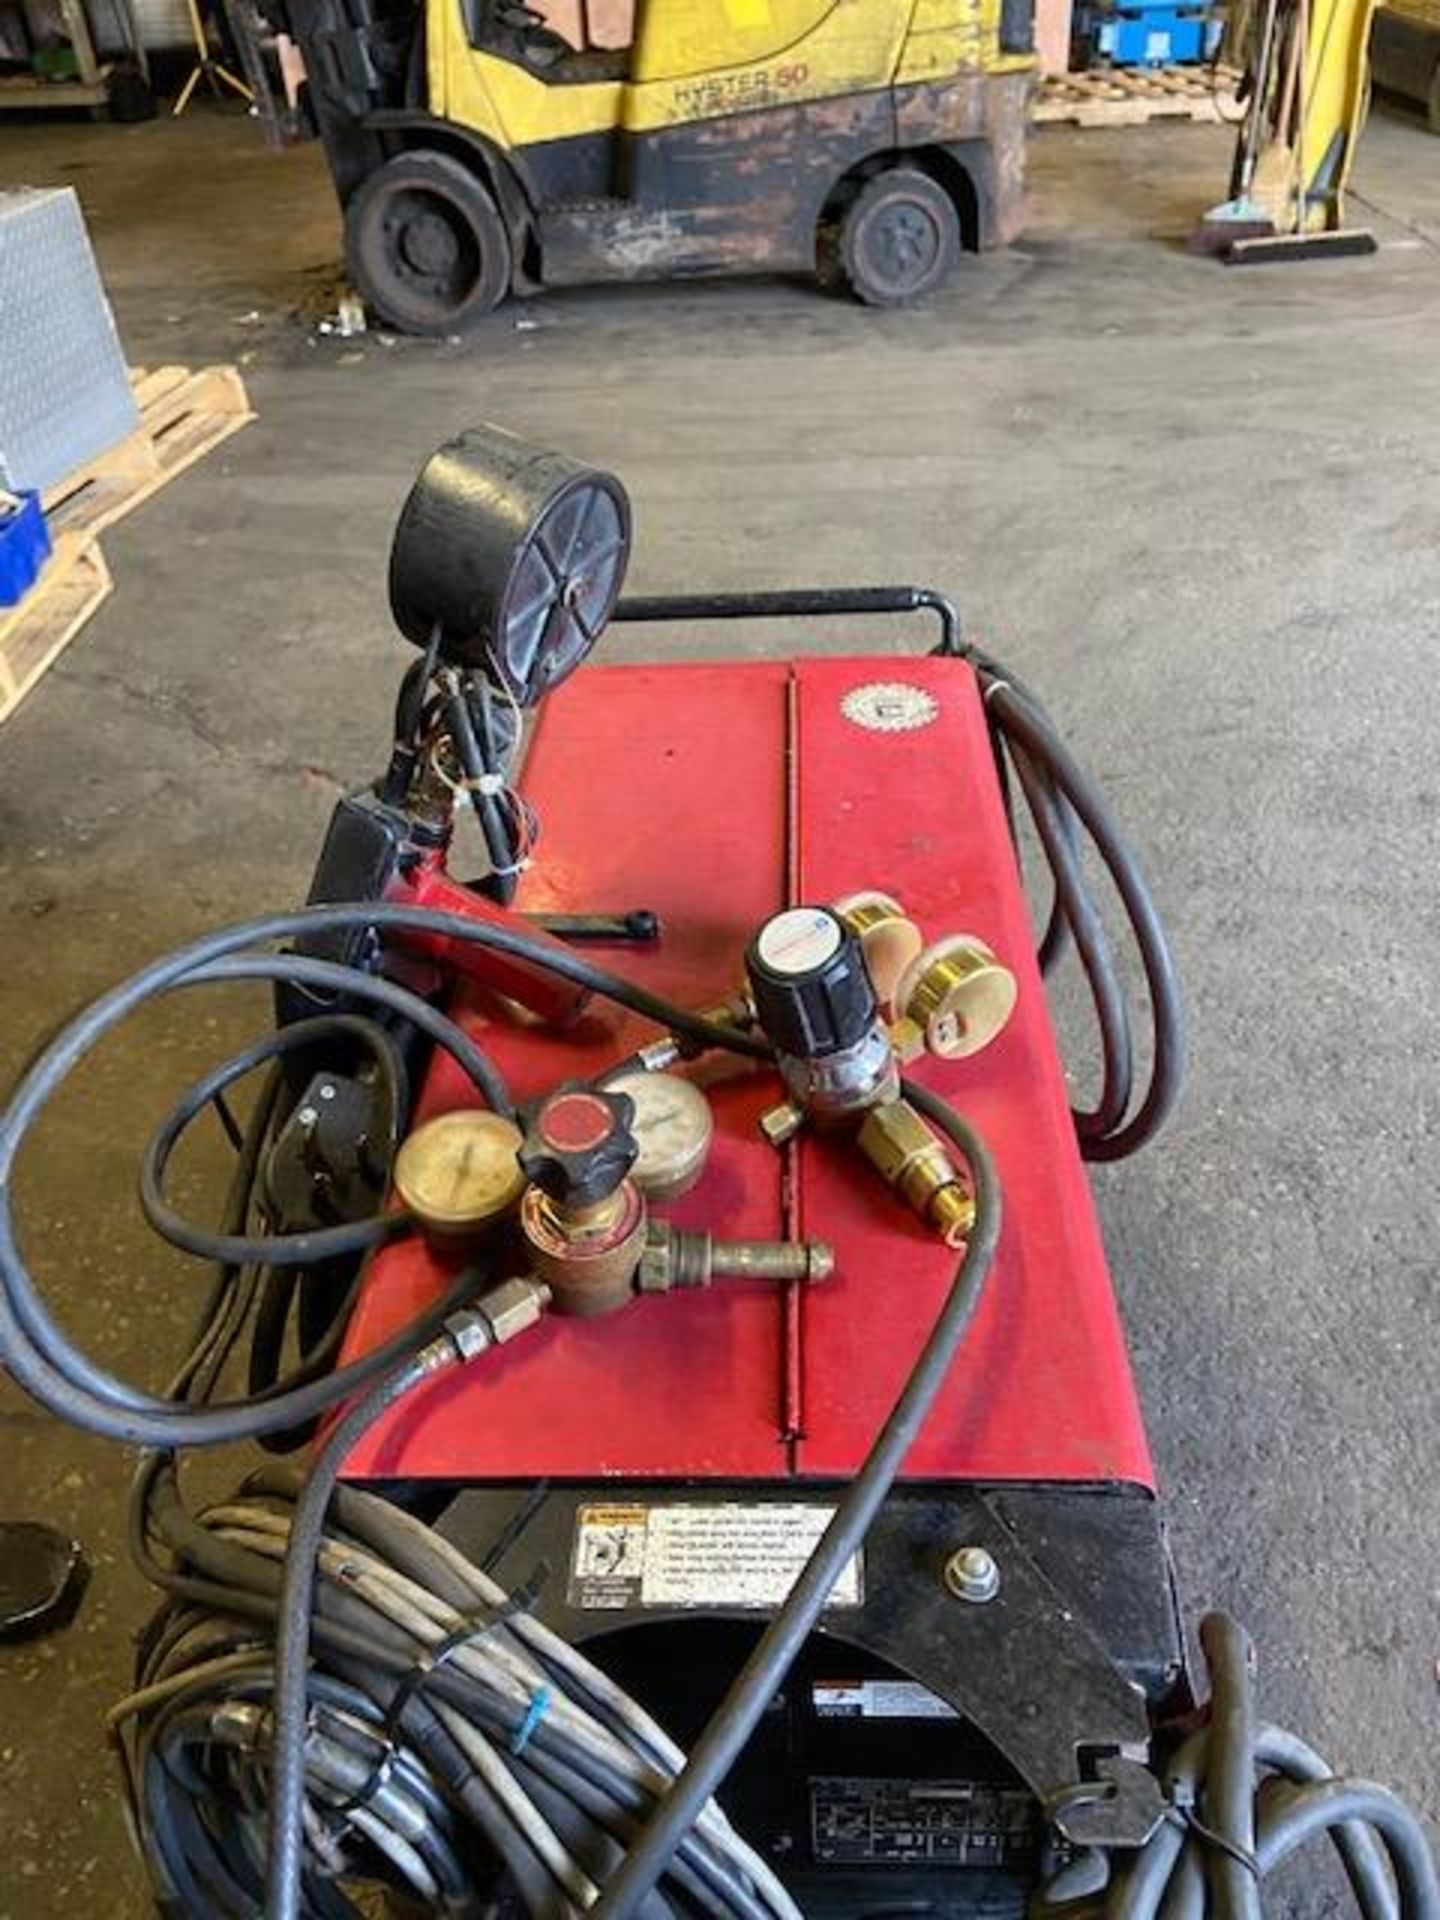 Lincoln Wire-Matic 255 Mig Welder Unit with Mig Gun and gauges complete with Aluminum Spool Gun - Image 3 of 3